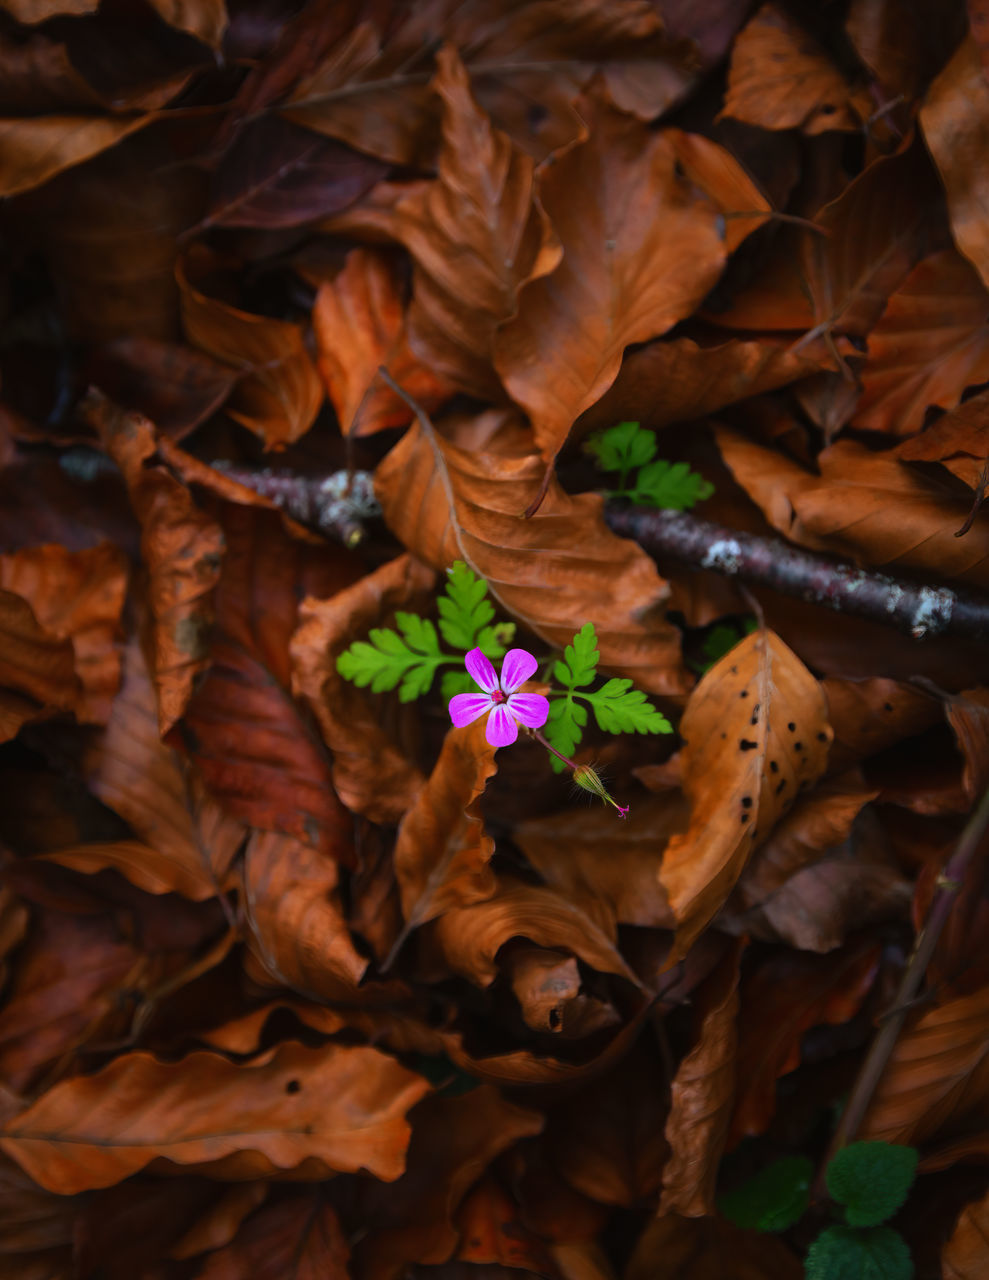 leaf, plant part, autumn, plant, nature, beauty in nature, fragility, dry, close-up, no people, tree, brown, growth, leaves, high angle view, flower, outdoors, soil, branch, full frame, day, freshness, land, flowering plant, directly above, backgrounds